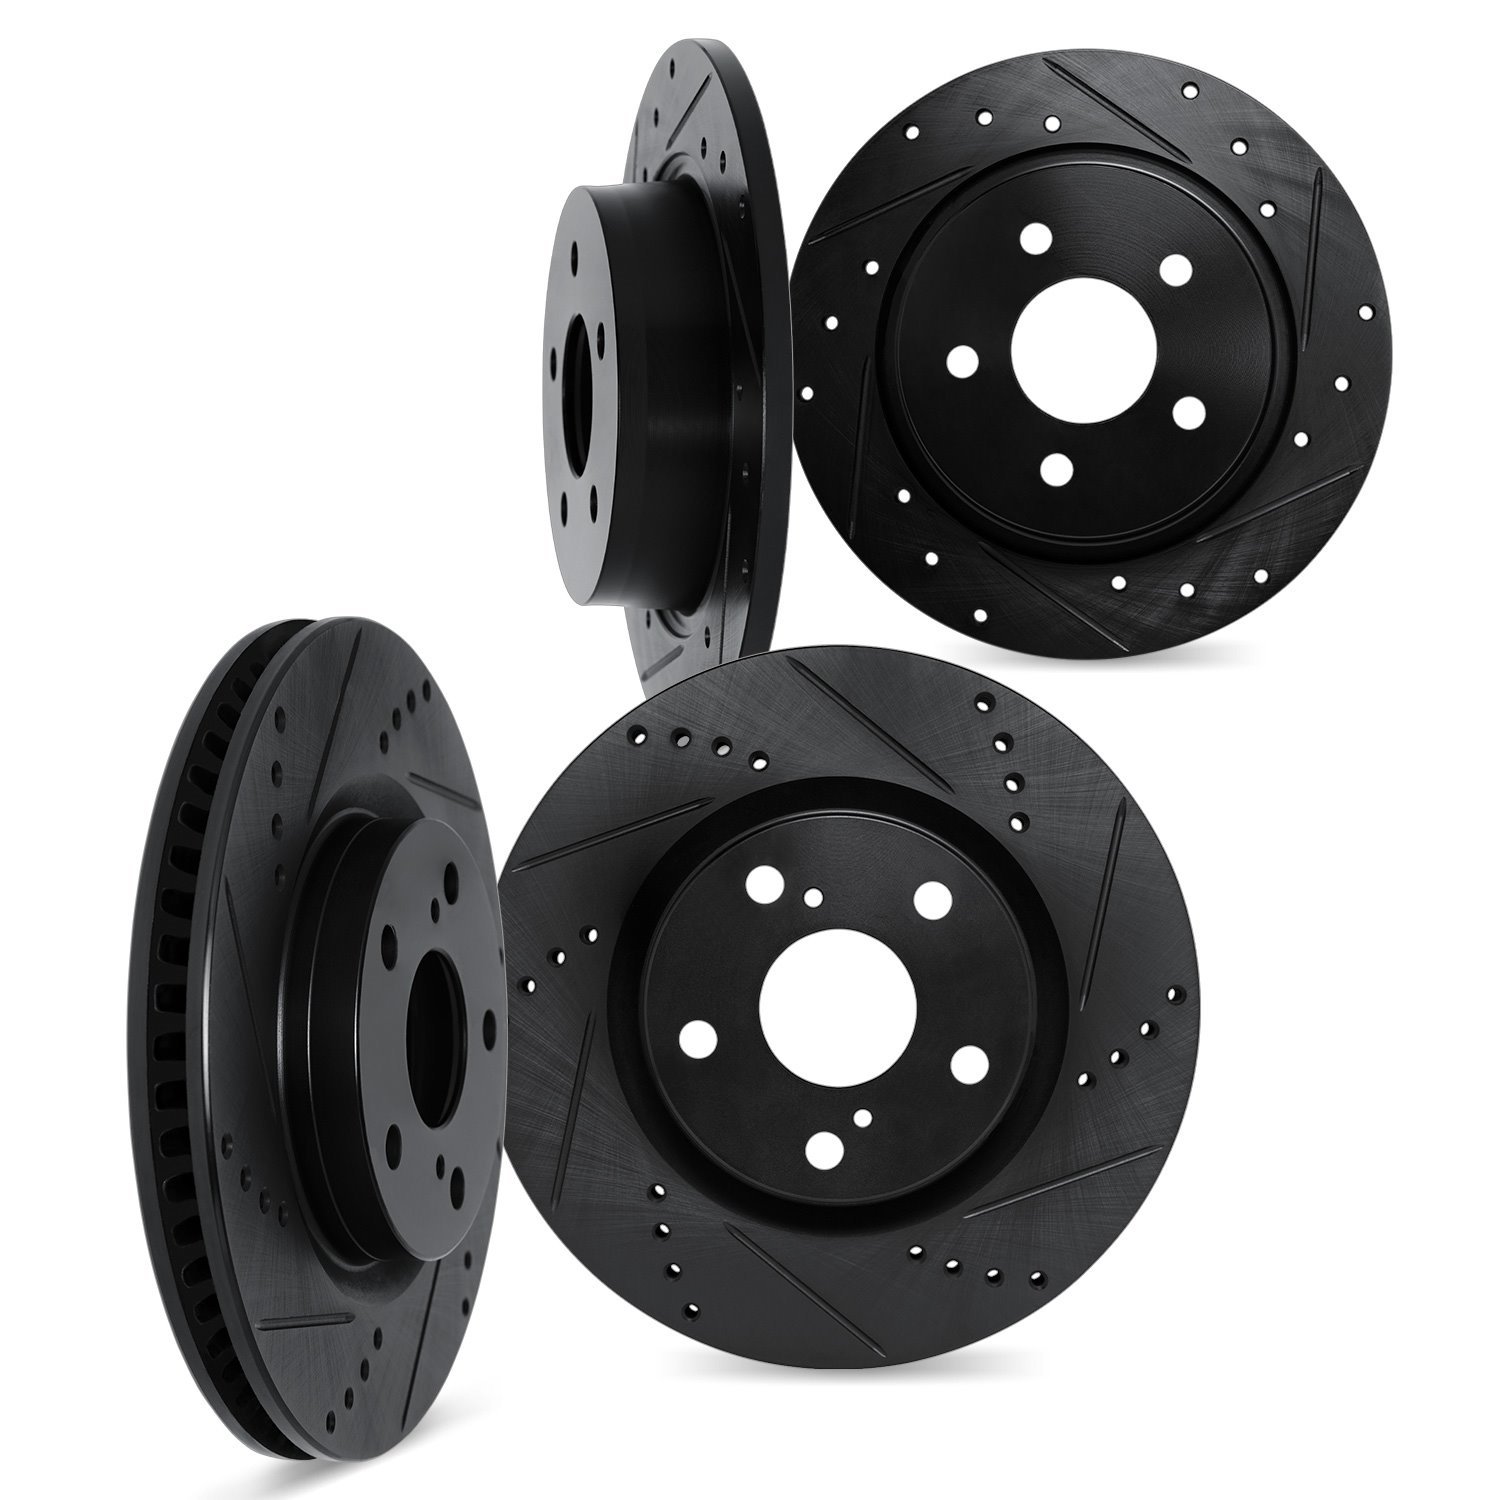 8004-01014 Drilled/Slotted Brake Rotors [Black], 2007-2014 Suzuki, Position: Front and Rear